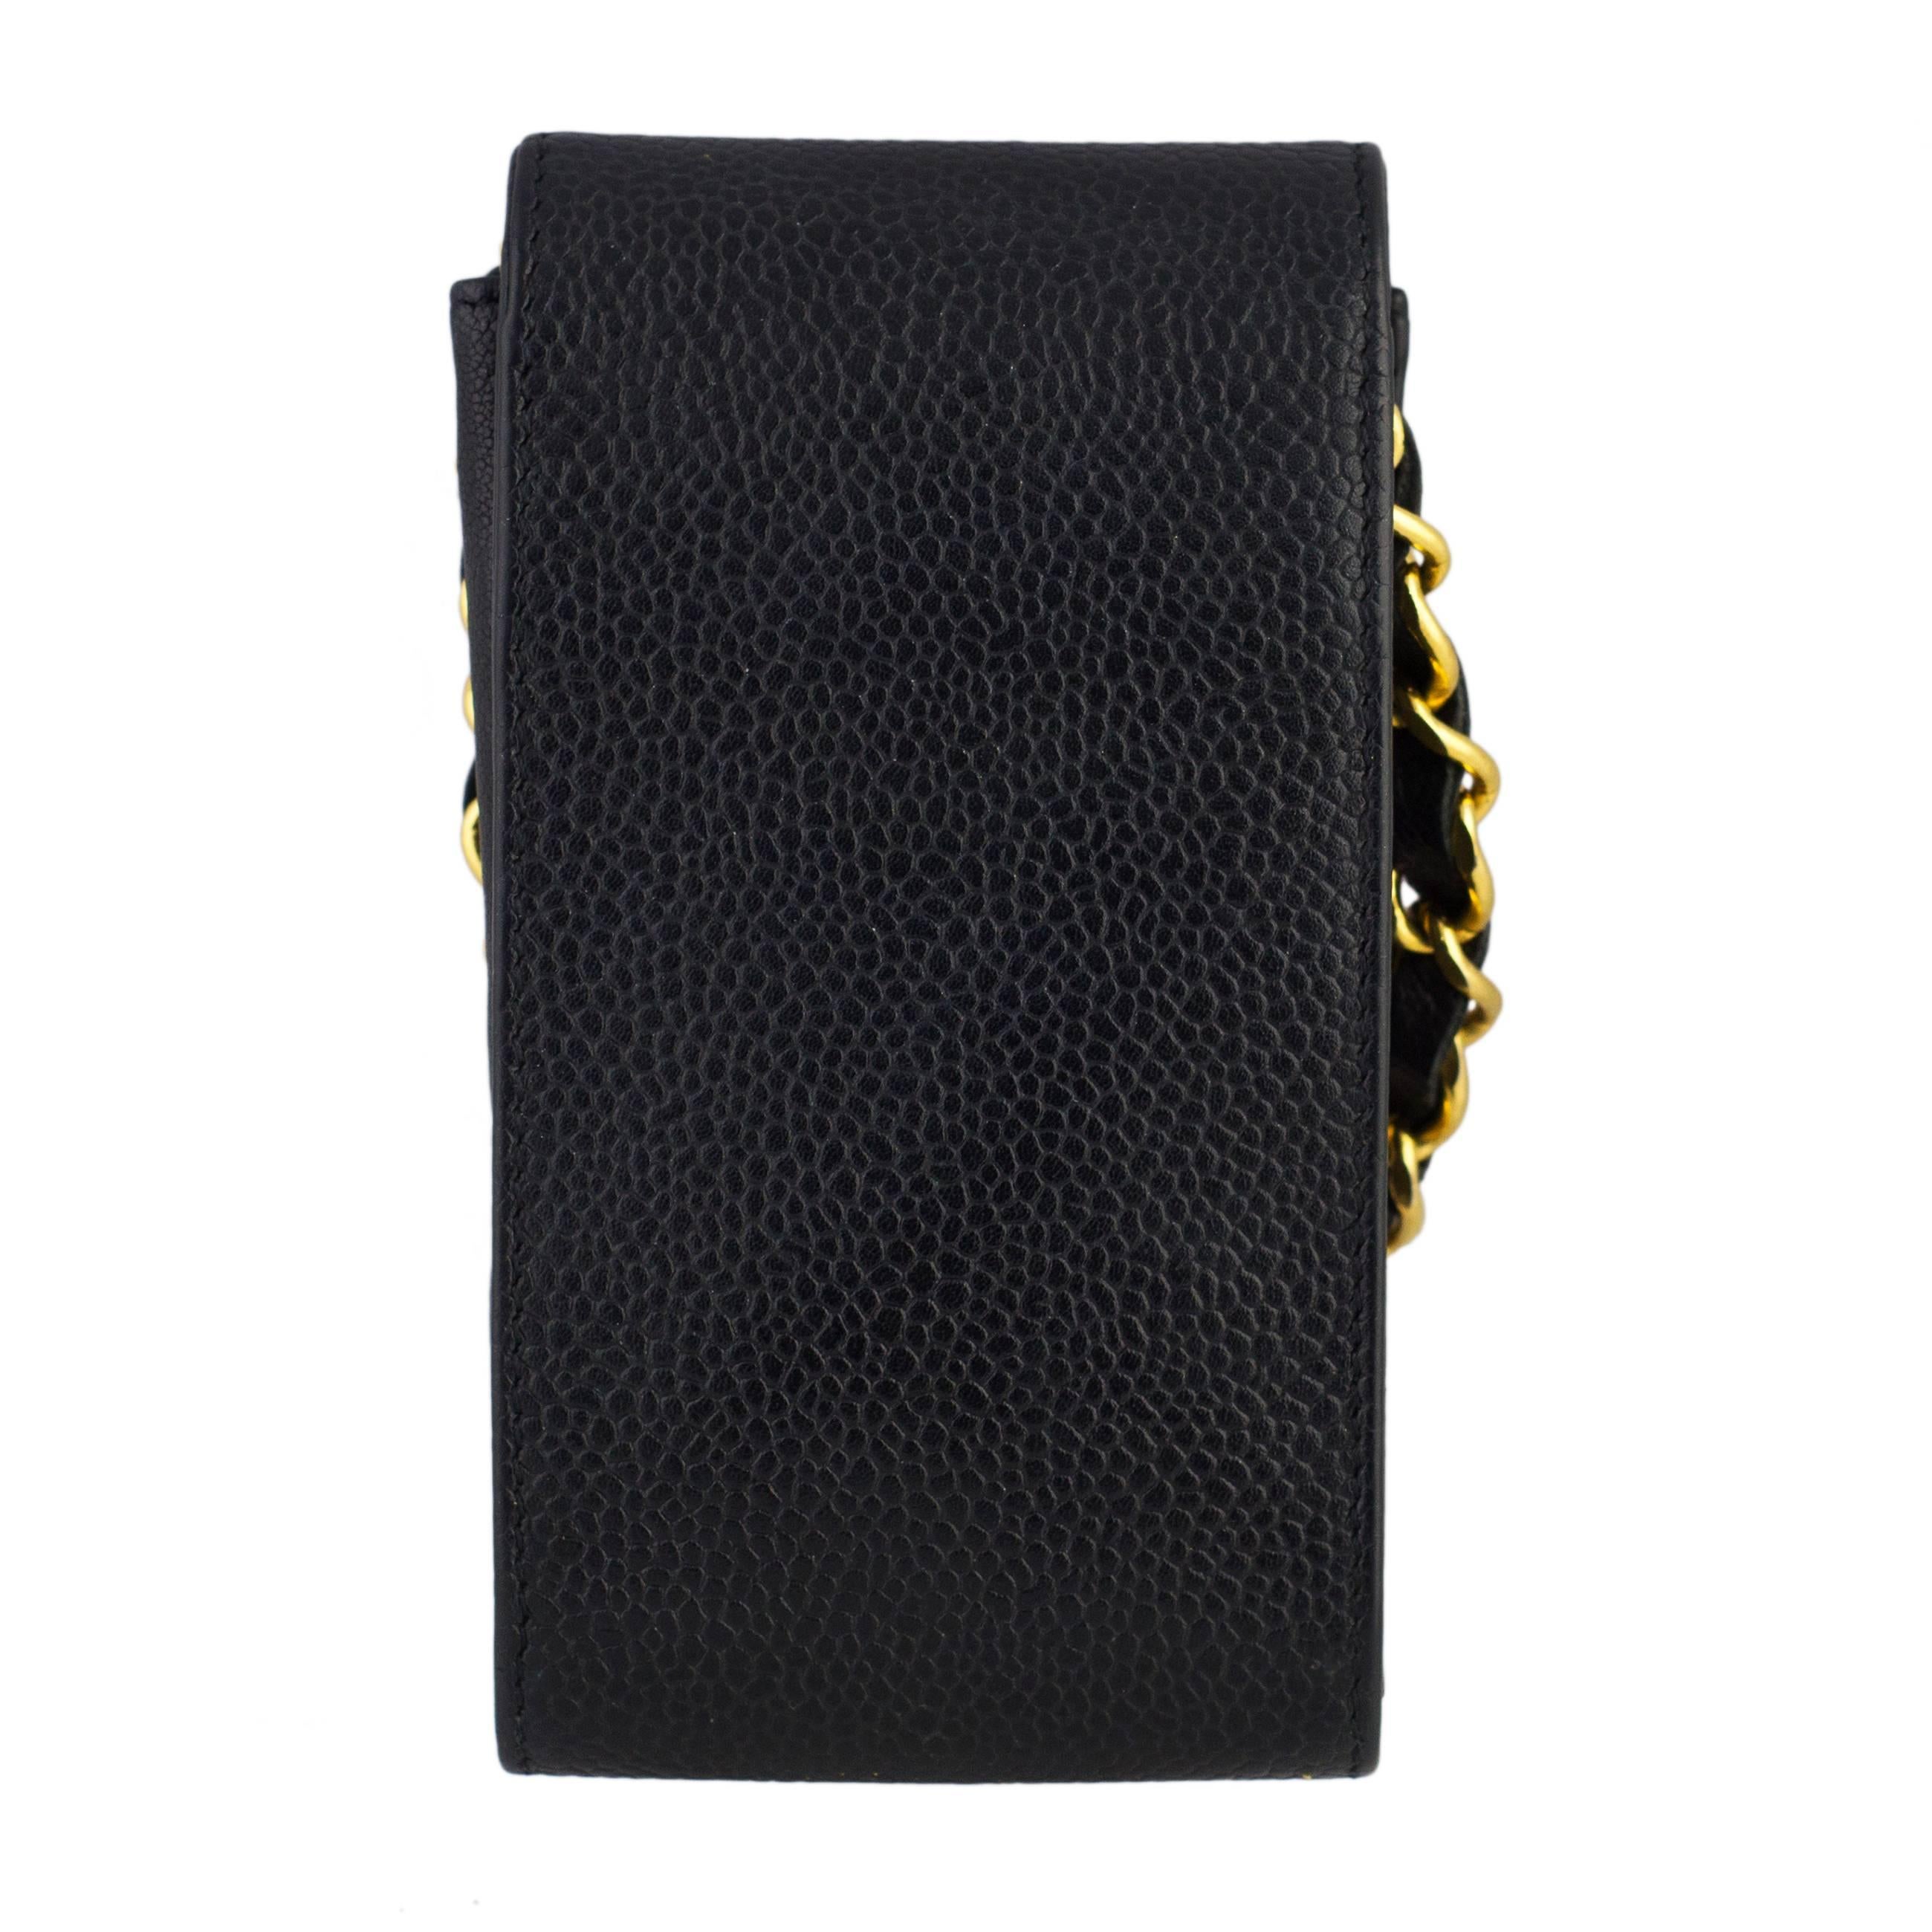 Chanel Black Caviar Phone / Lipstick Case
High carat gold plated hardware. 
With serial number in tact.
Made in France in the 1990's
Please note : This does NOT fit the iphone as it made before the launch of the iphone. It is ideal for small phones,